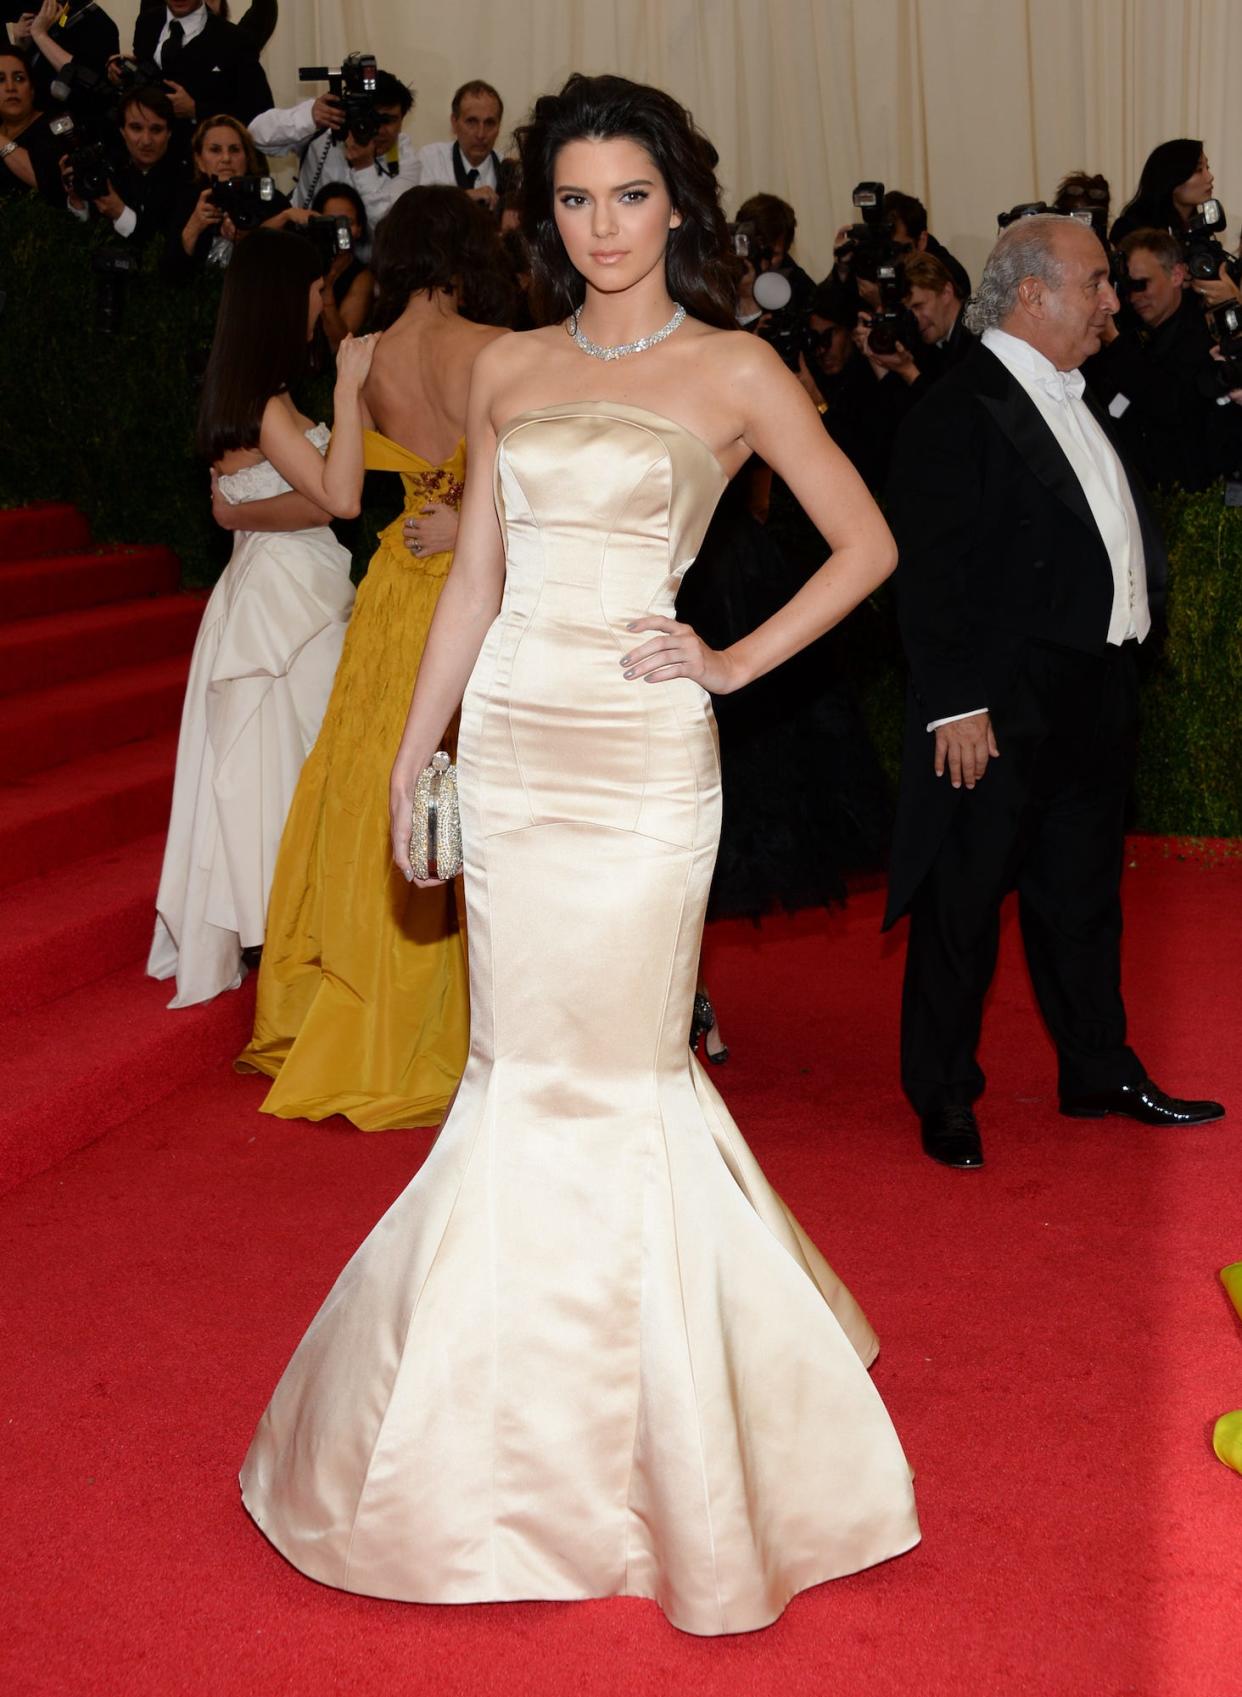 Kendall Jenner attends the 2014 Met Gala in a cream colored gown with a trumpet skirt.